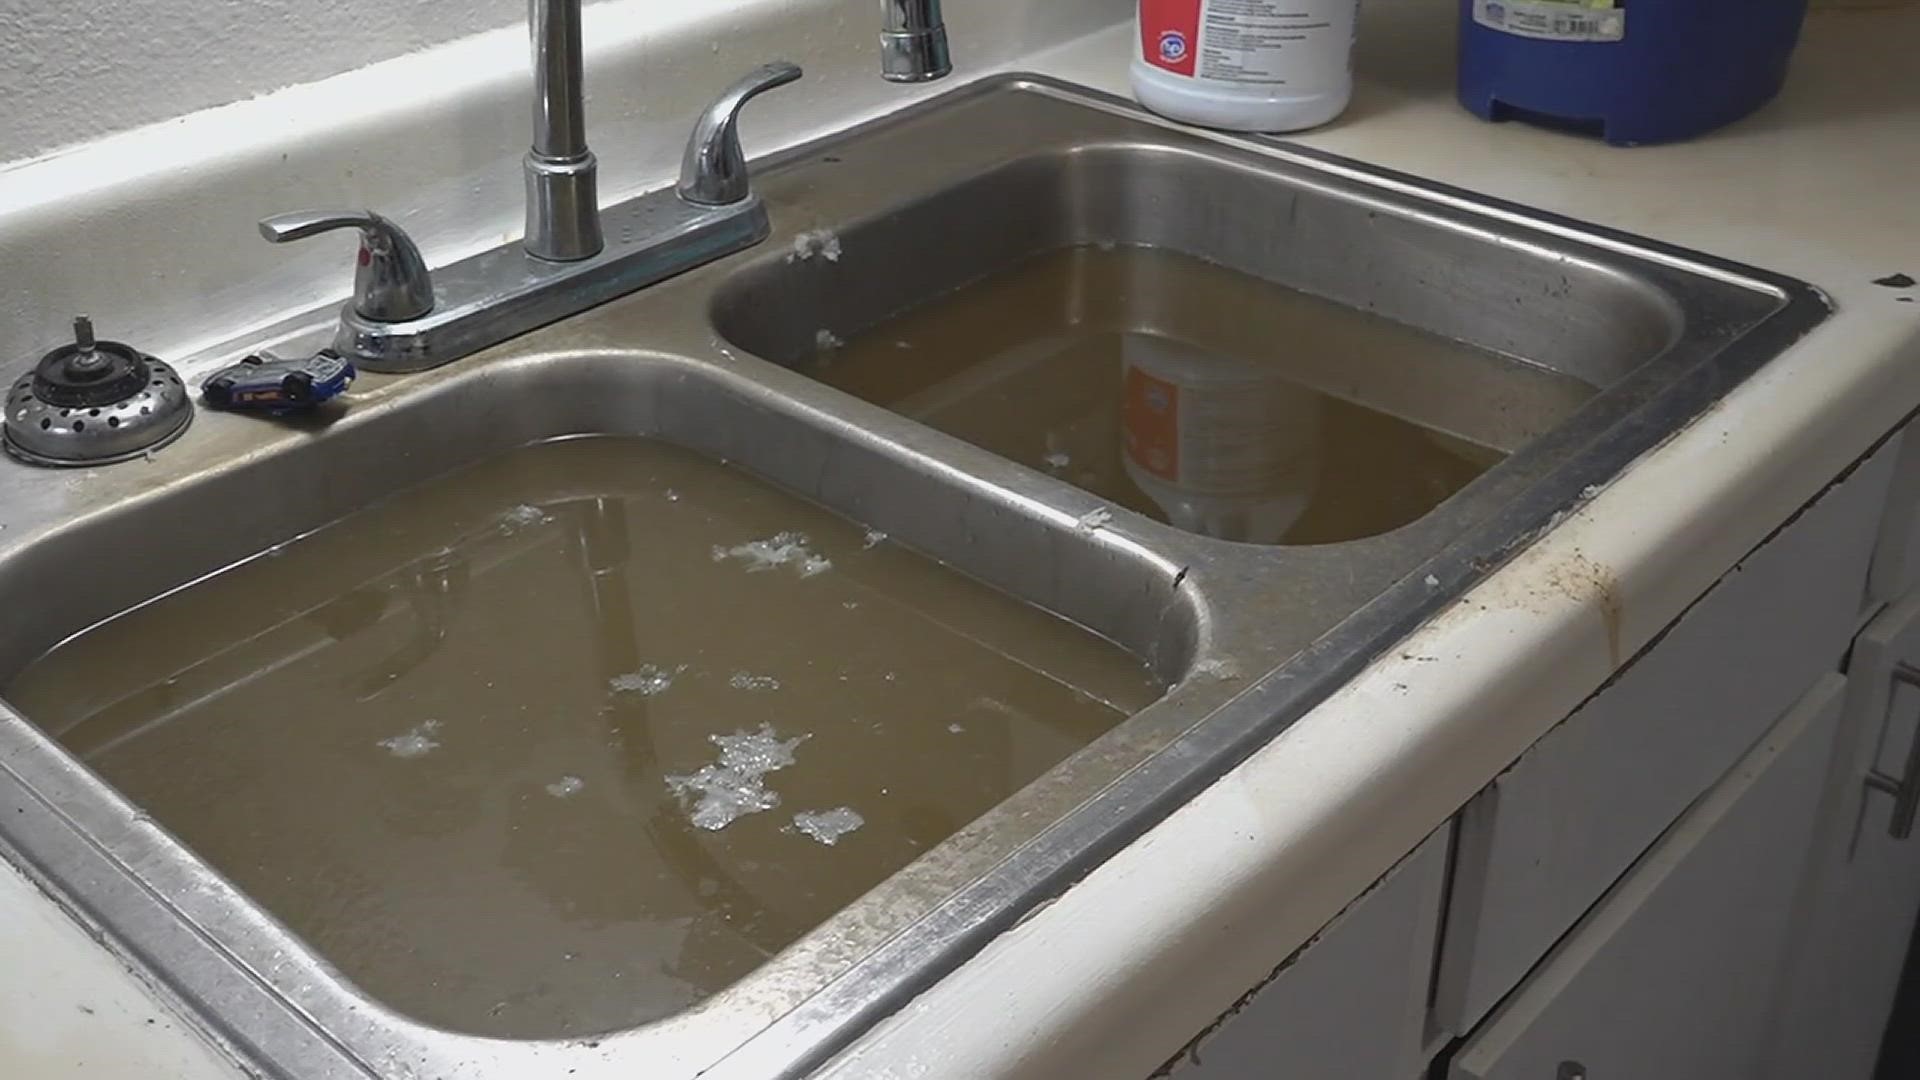 After going weeks without running water, frustrations are piling up for some Sabine Park Apartment residents who now say they have no where left to go.